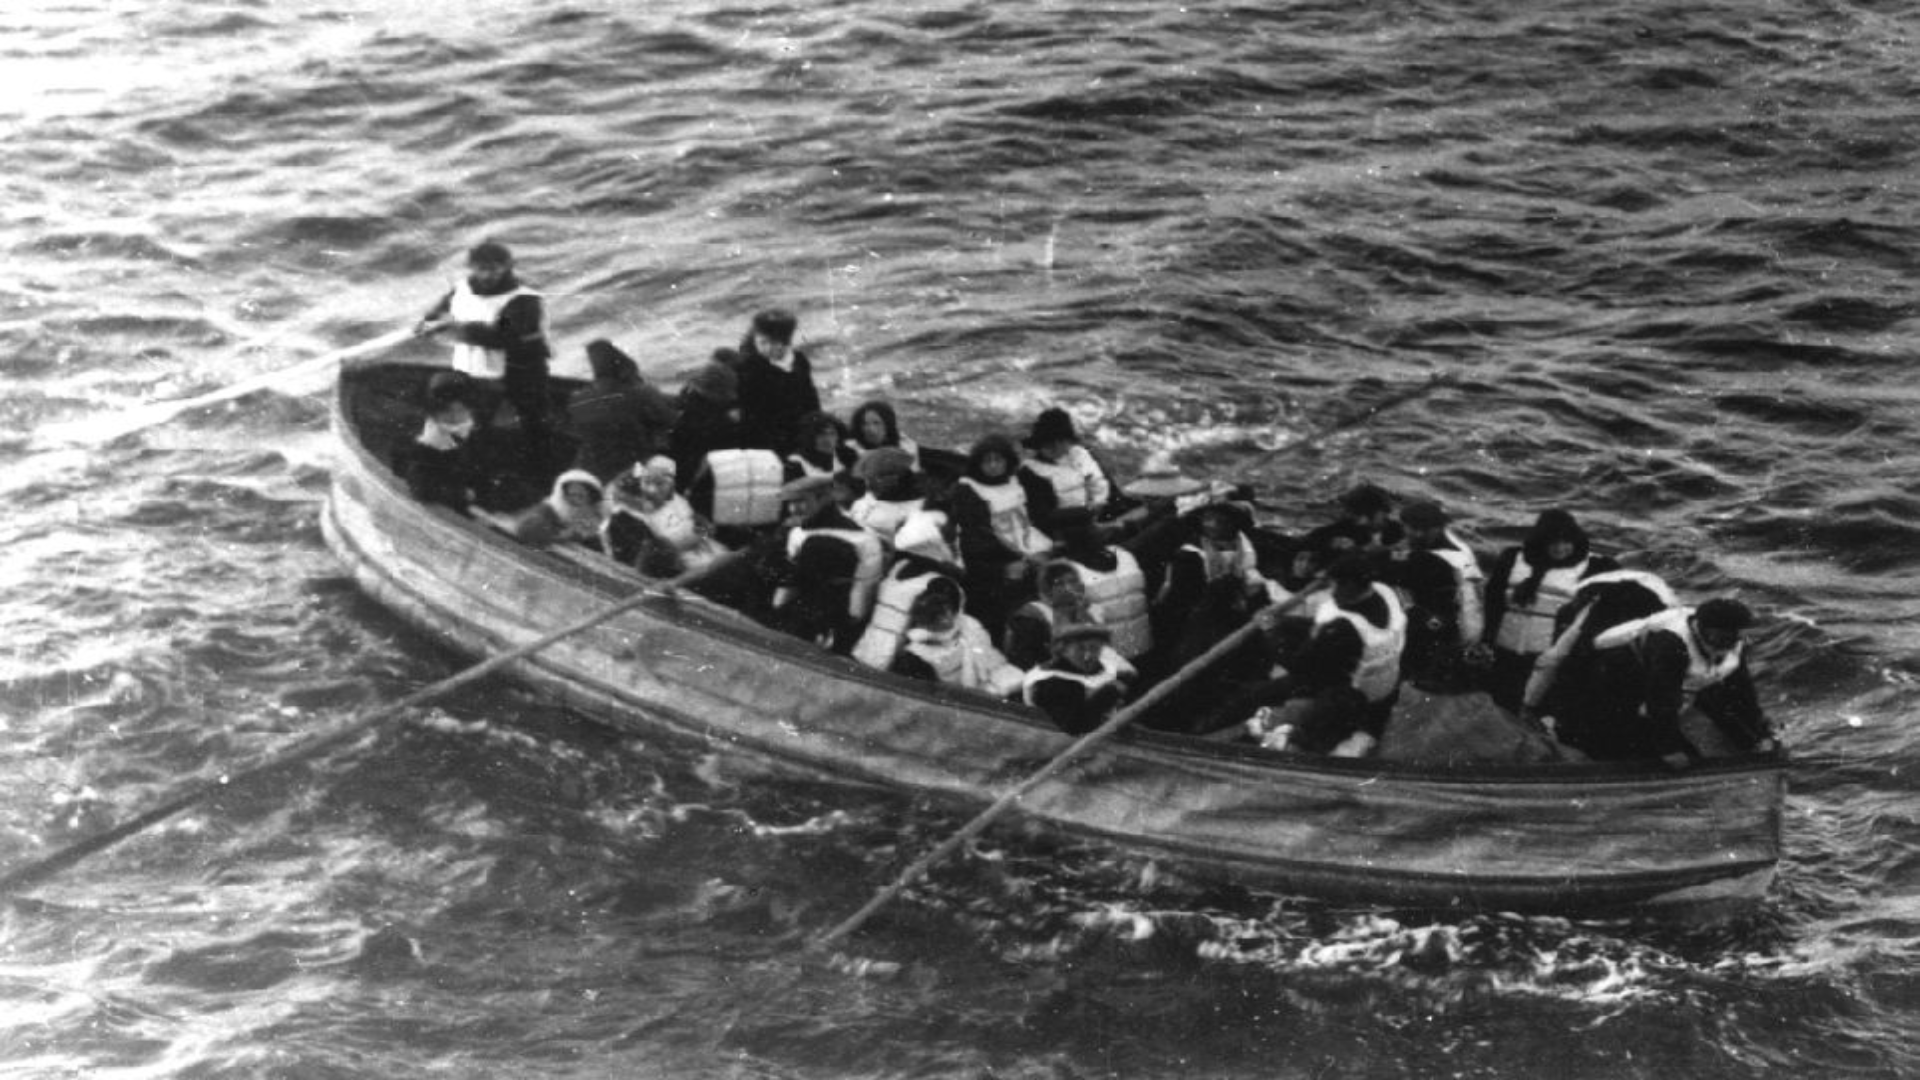 How did passenger class affect survival on the Titanic?